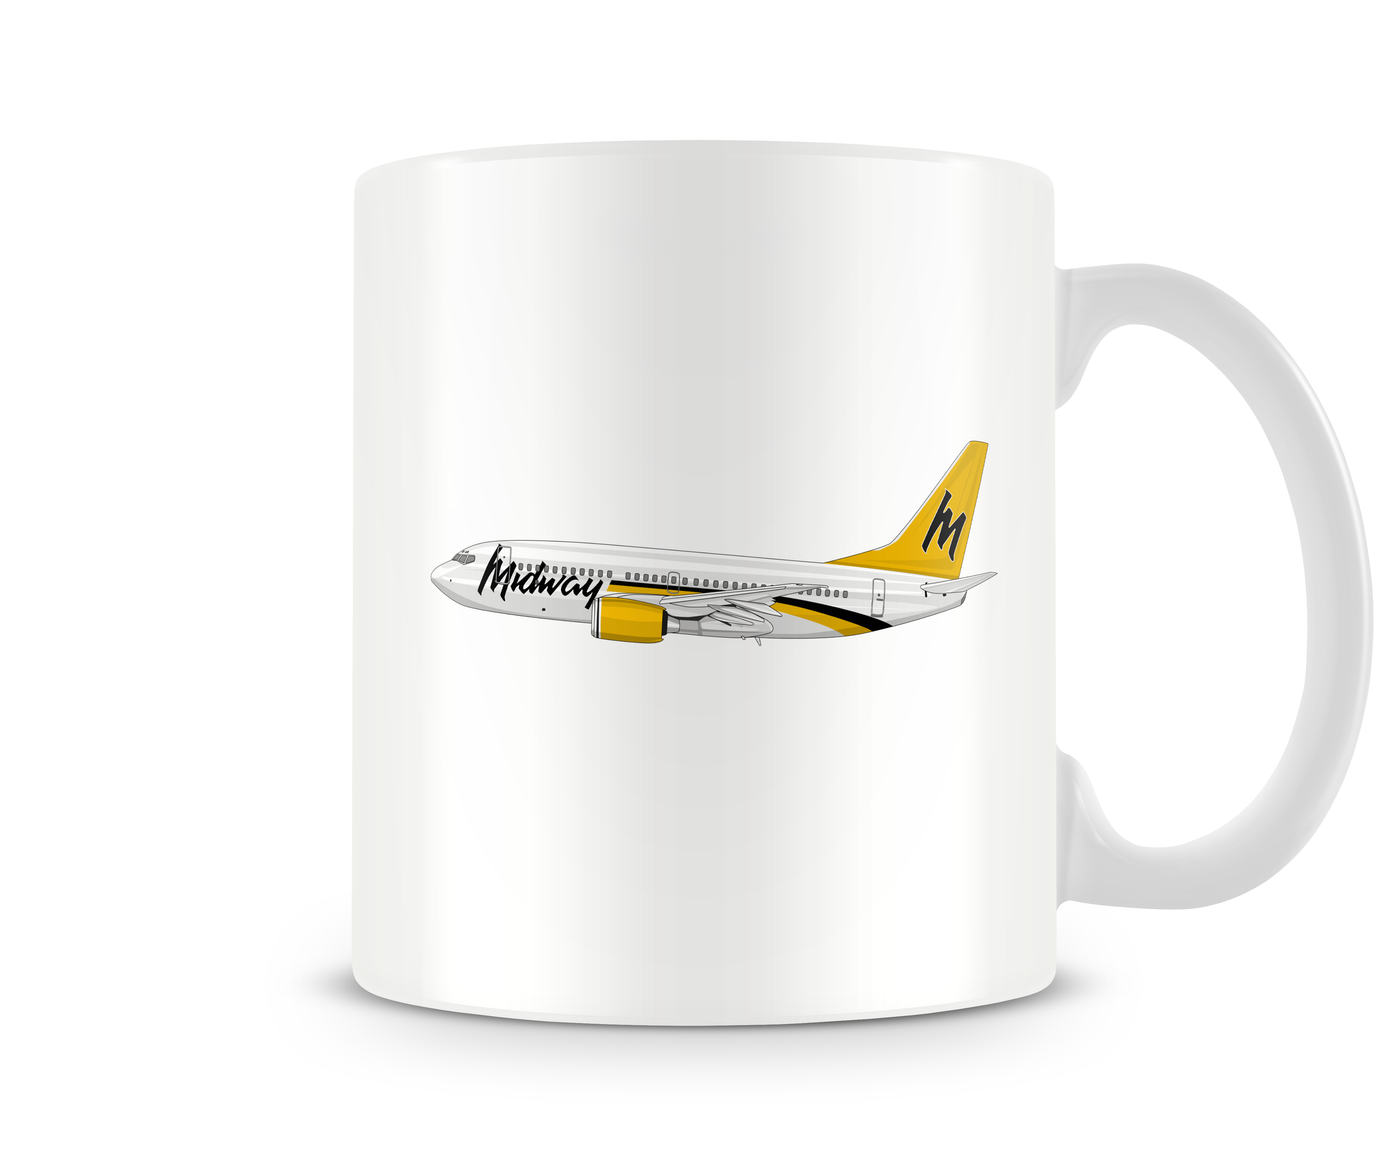 Midway Airlines Boeing 737NG Mug